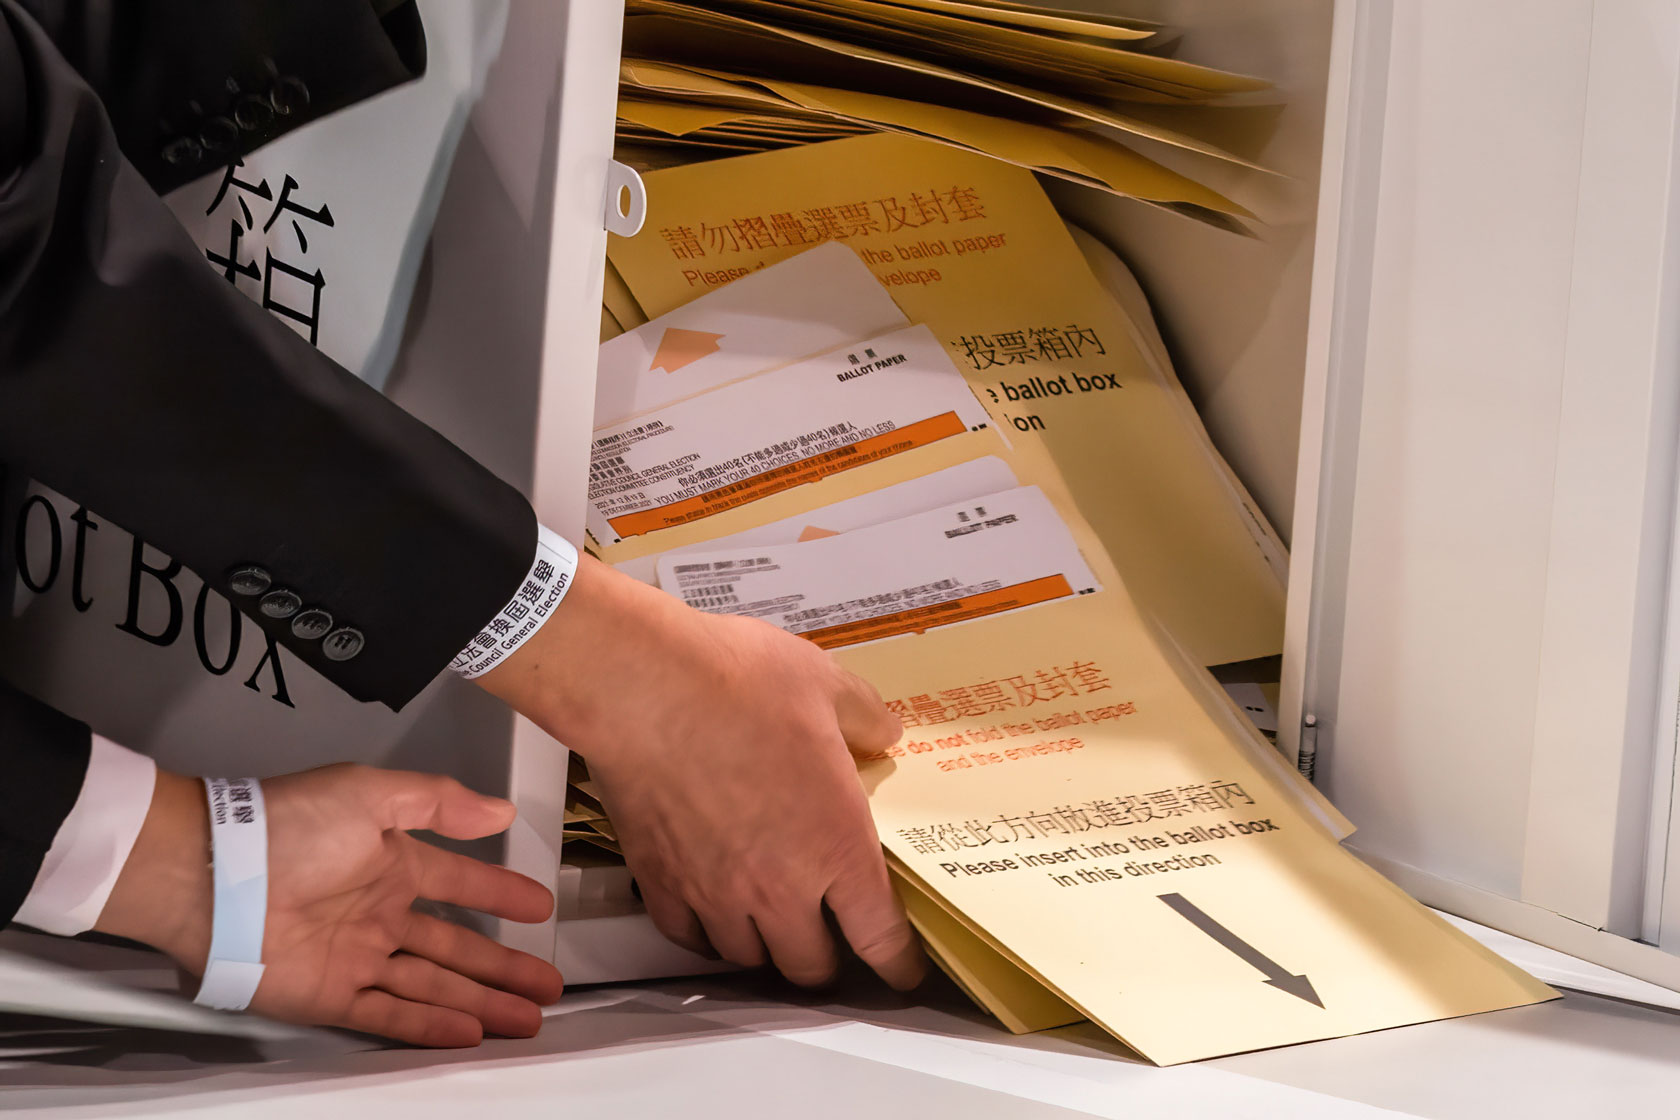 A box of ballots is seen being poured out onto a table.